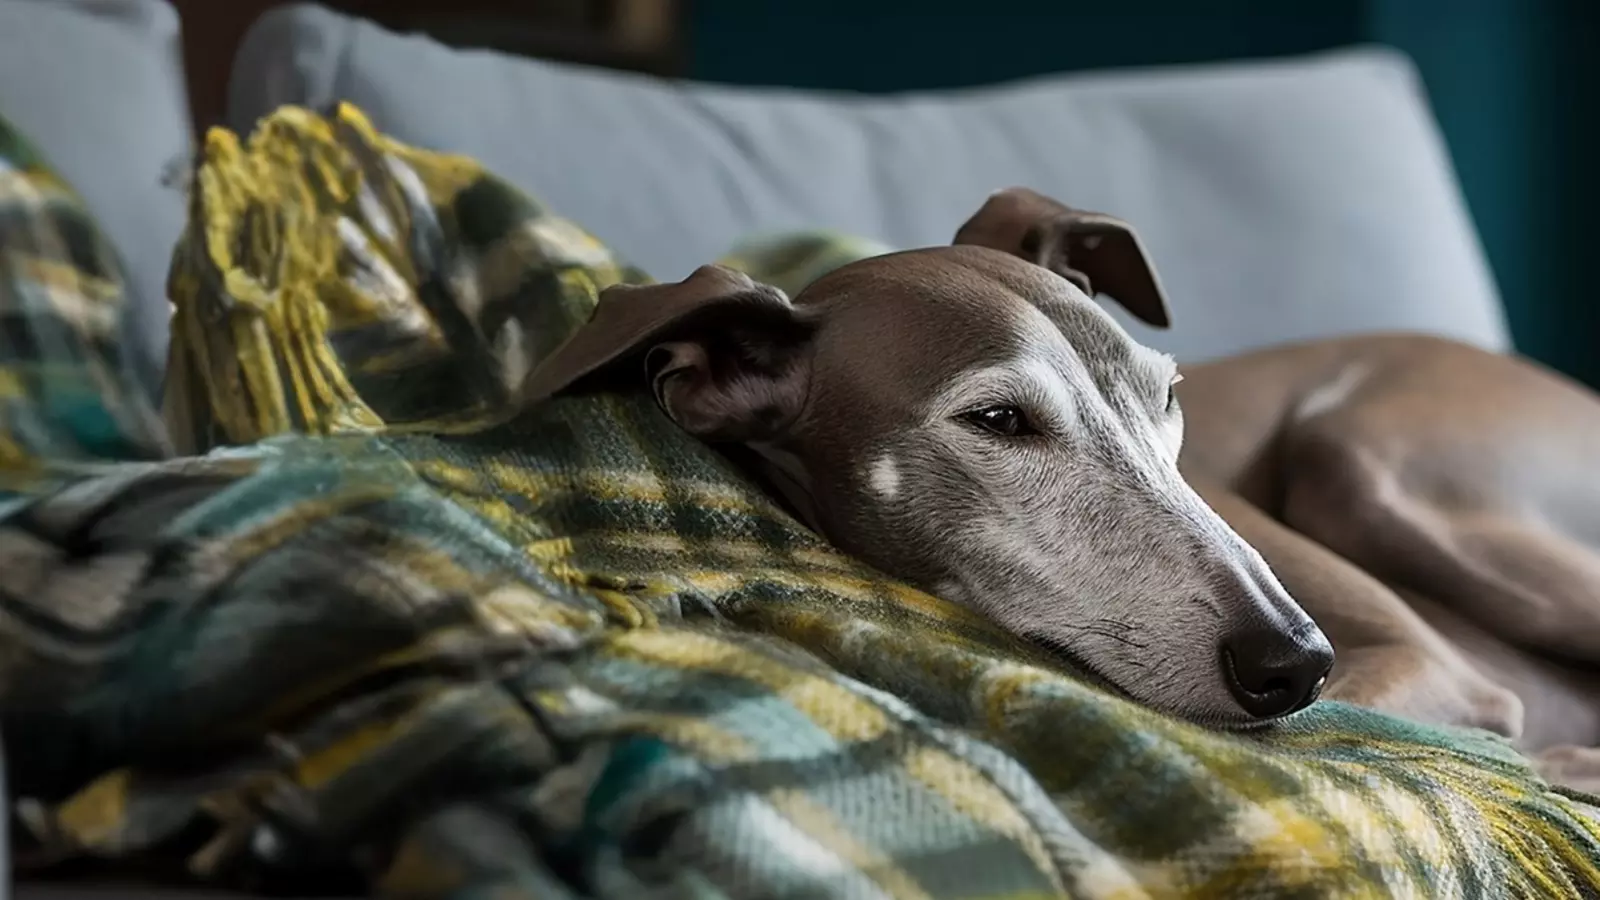 A greying greyhound lies in comfort on a sofa with his eyes partially closed as if dozing off